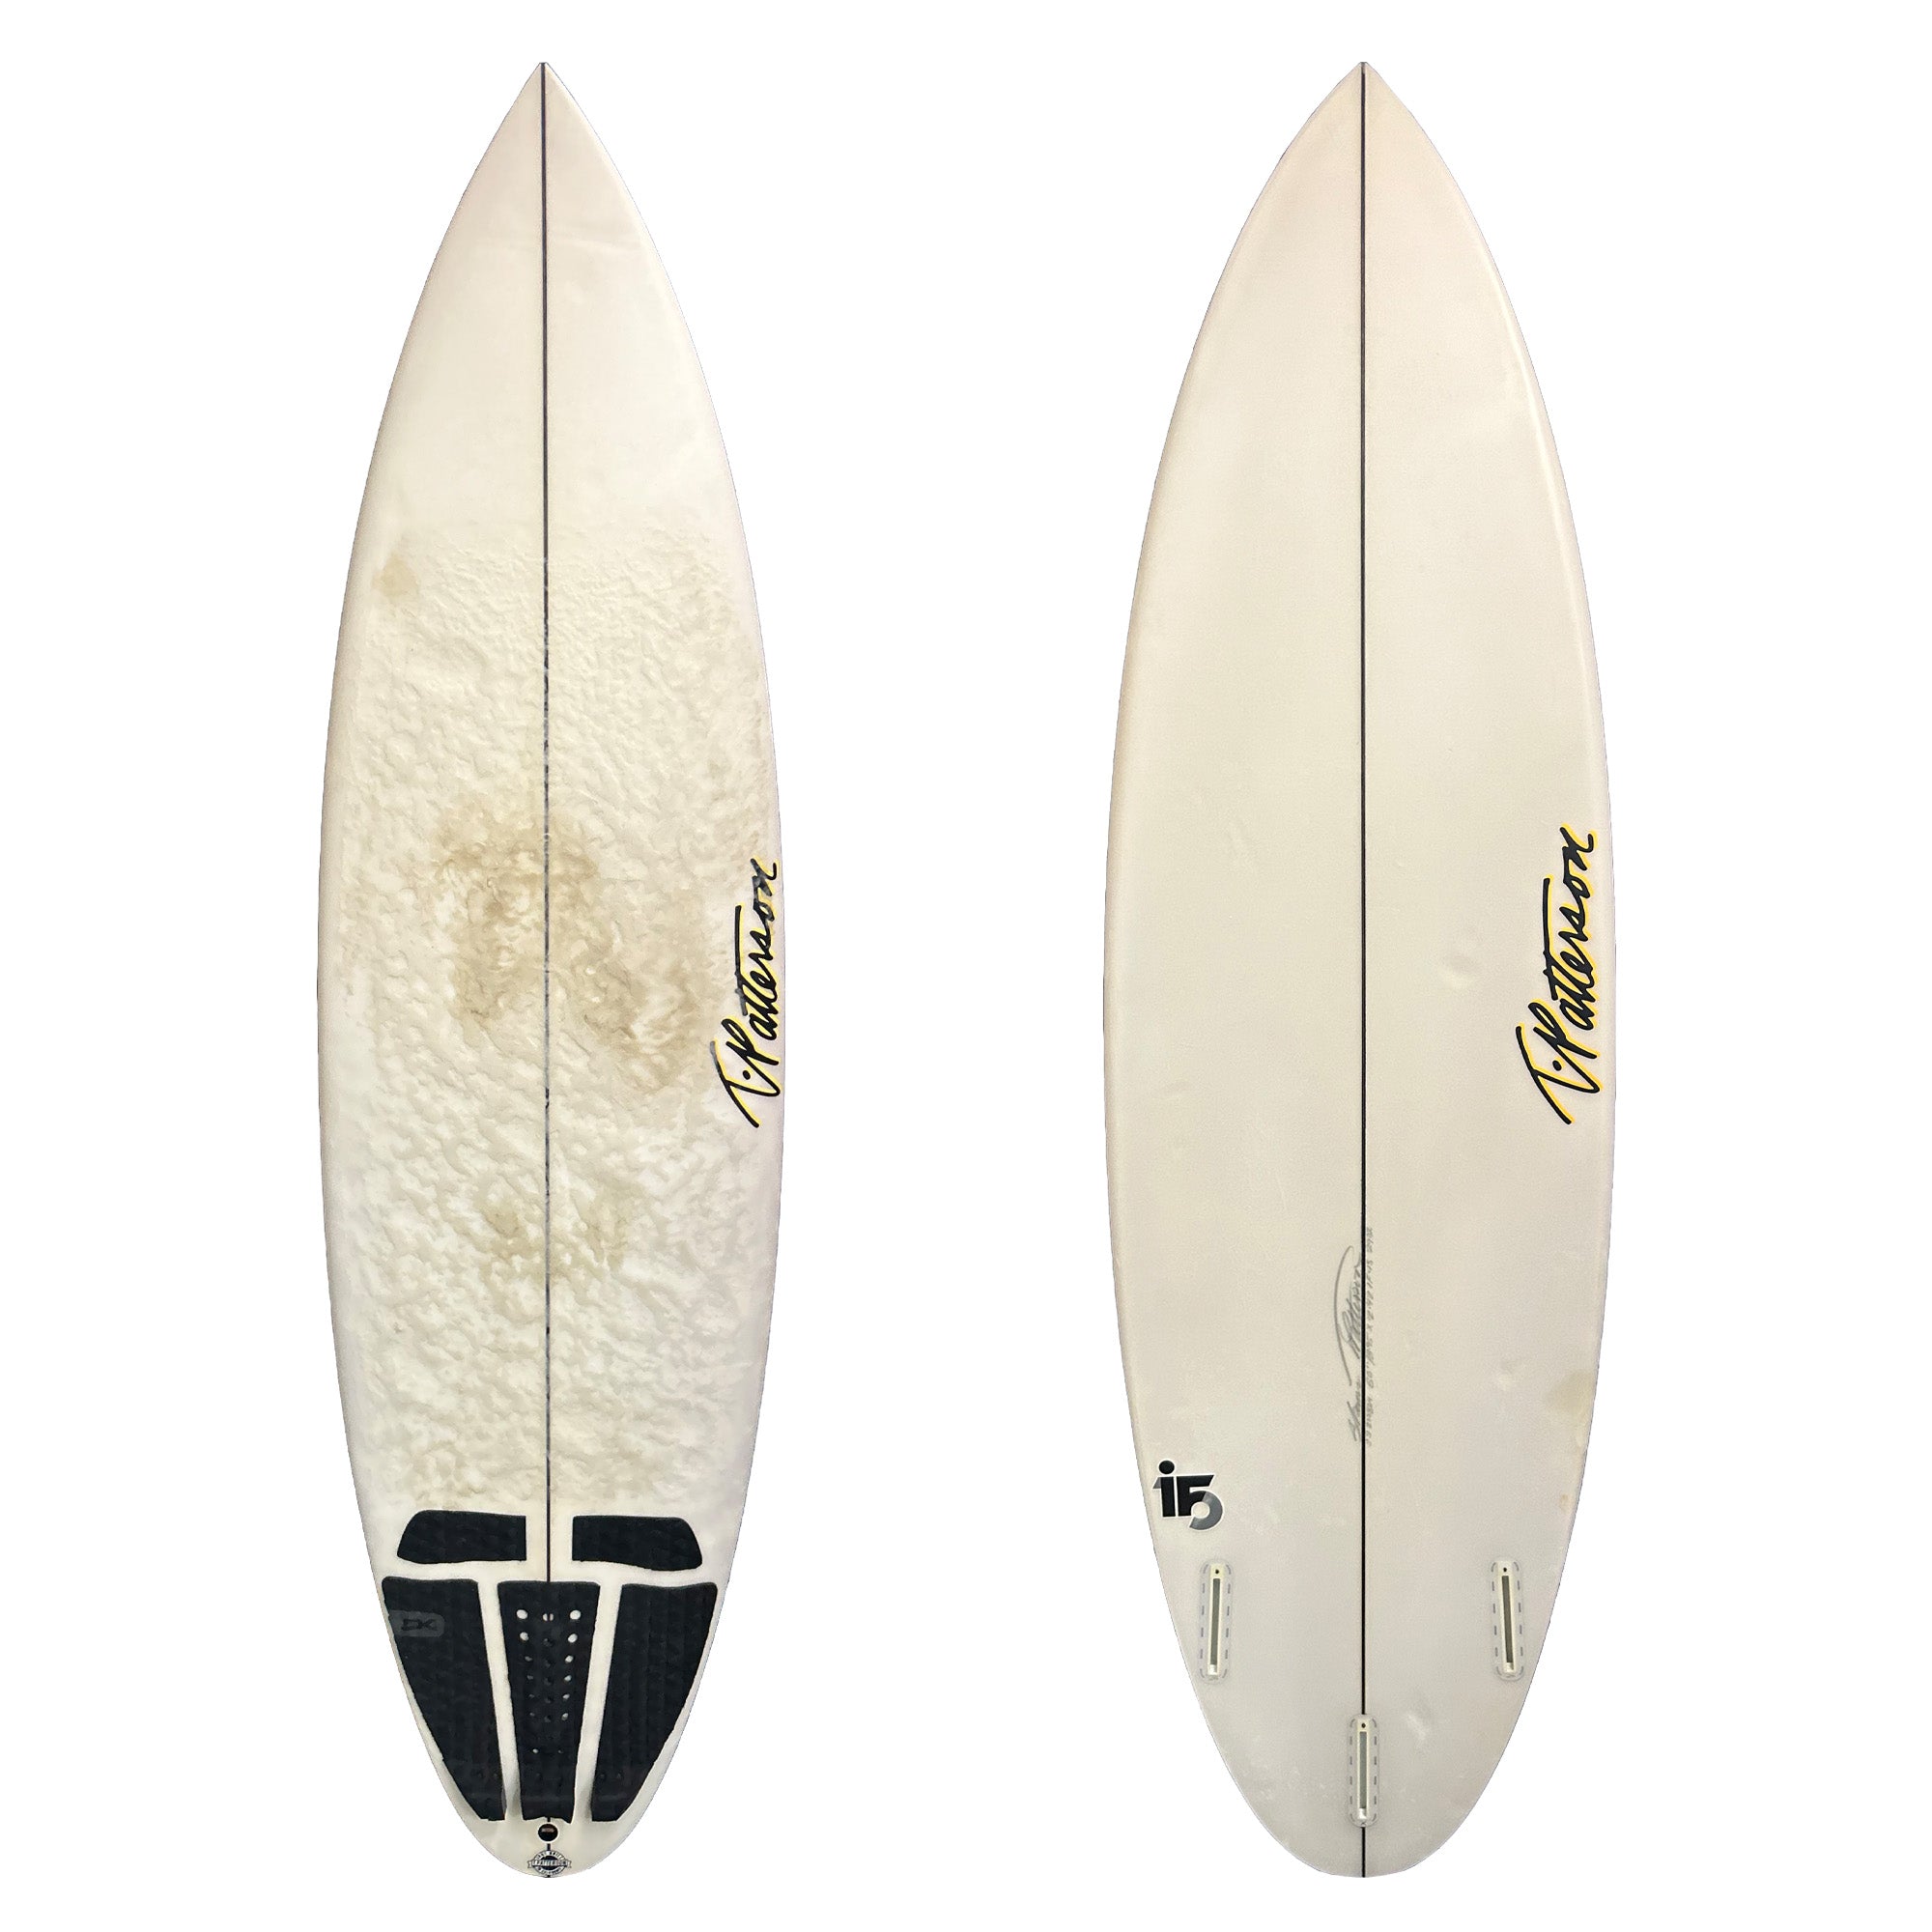 T. Patterson I-15 6' Consignment Surfboard